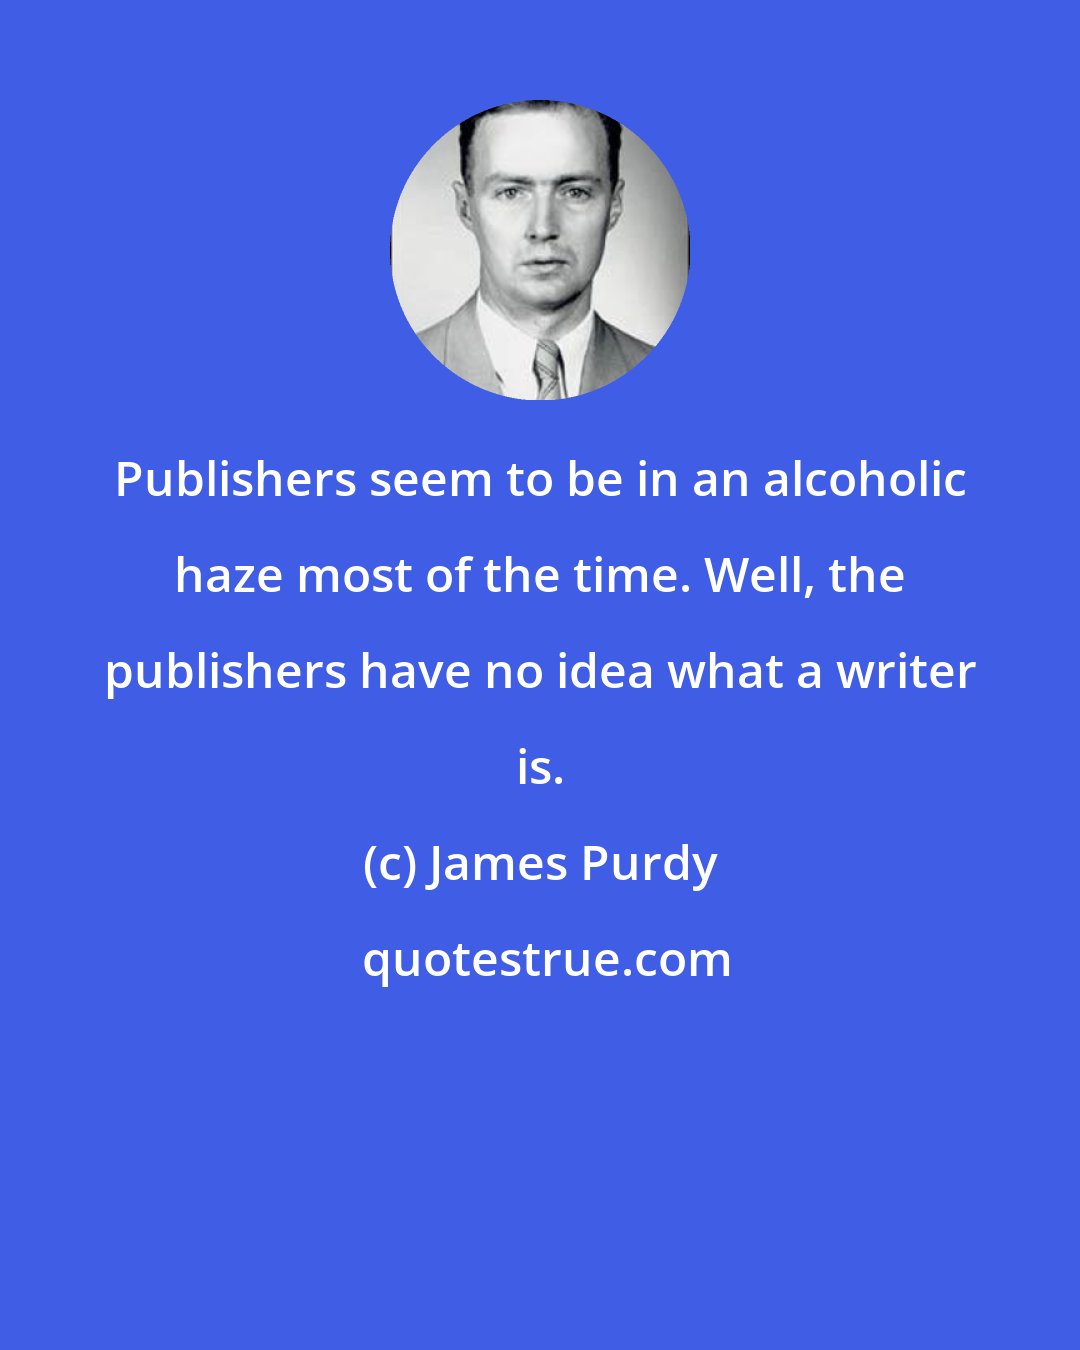 James Purdy: Publishers seem to be in an alcoholic haze most of the time. Well, the publishers have no idea what a writer is.